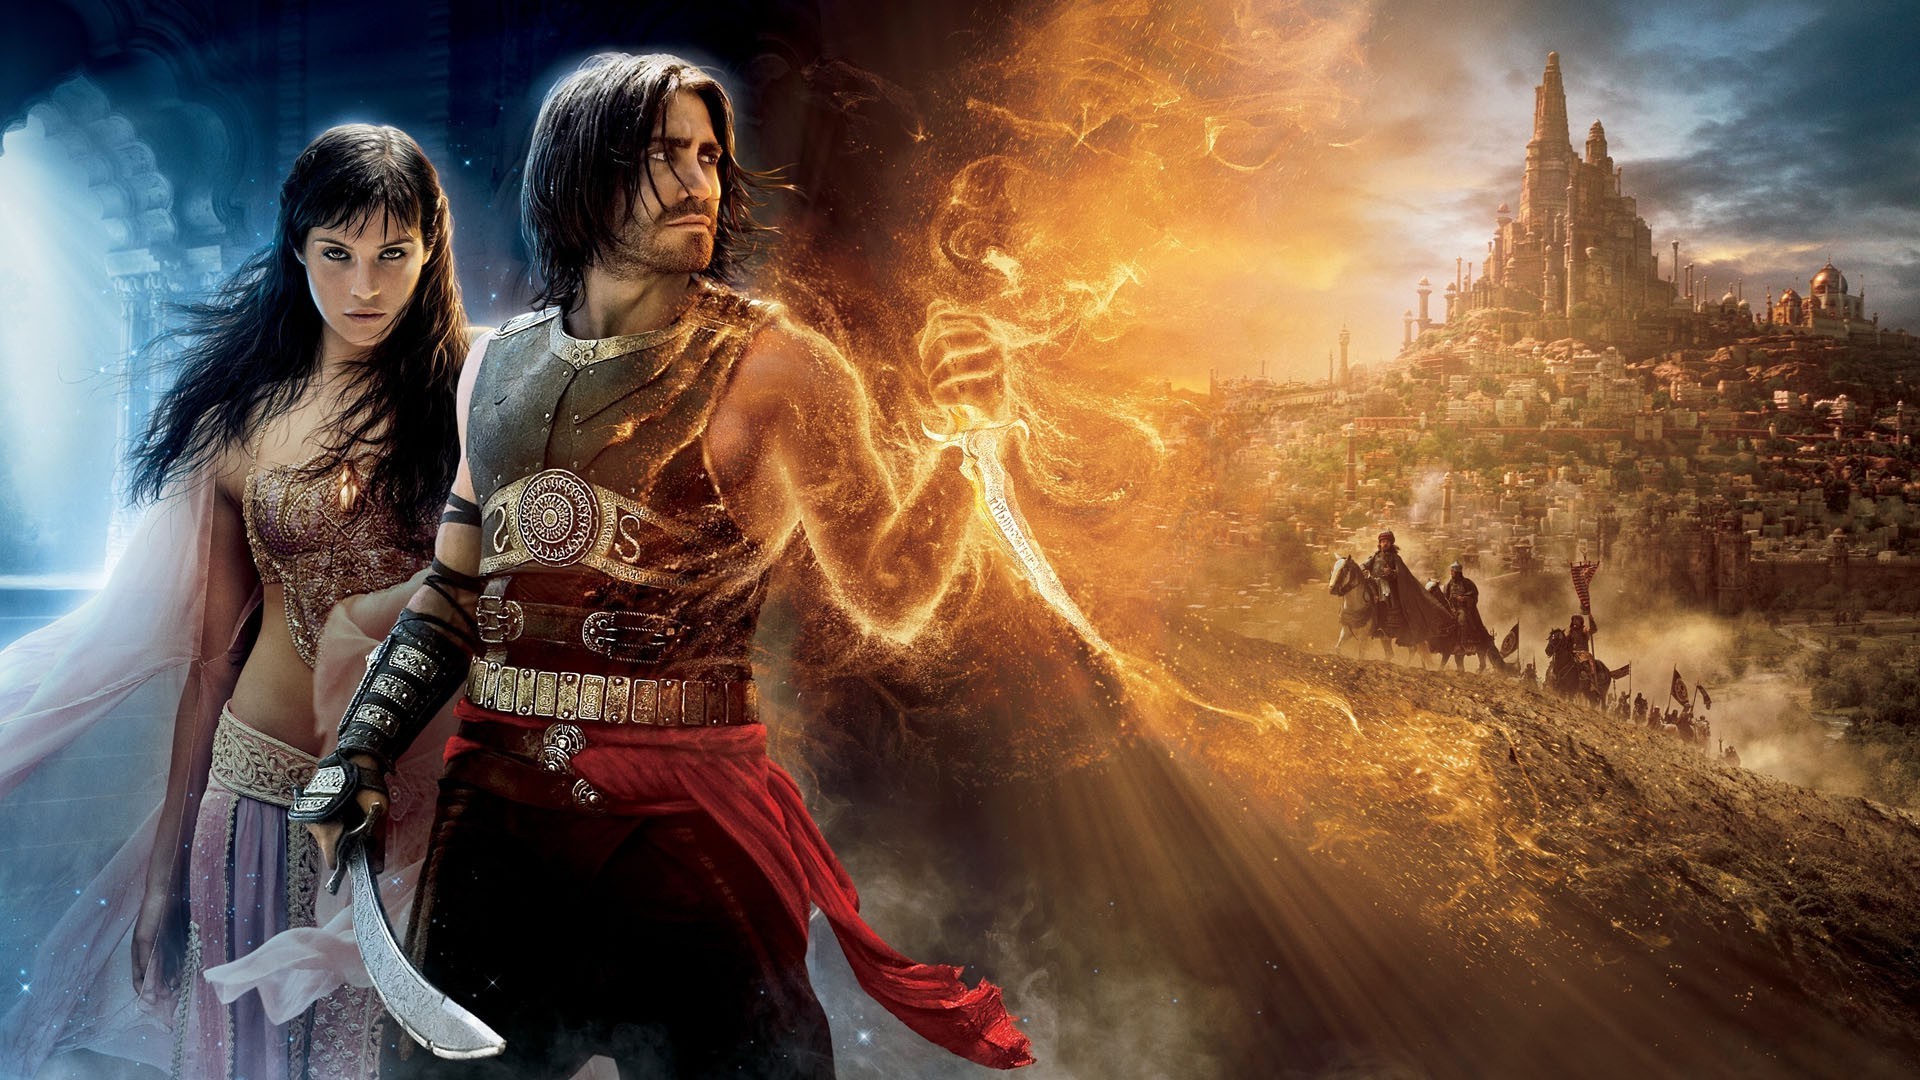 Prince Of Persia: The Sands Of Time, Movies, Jake Gyllenhaal, Gemma Arterton, Prince Of Persia Wallpaper